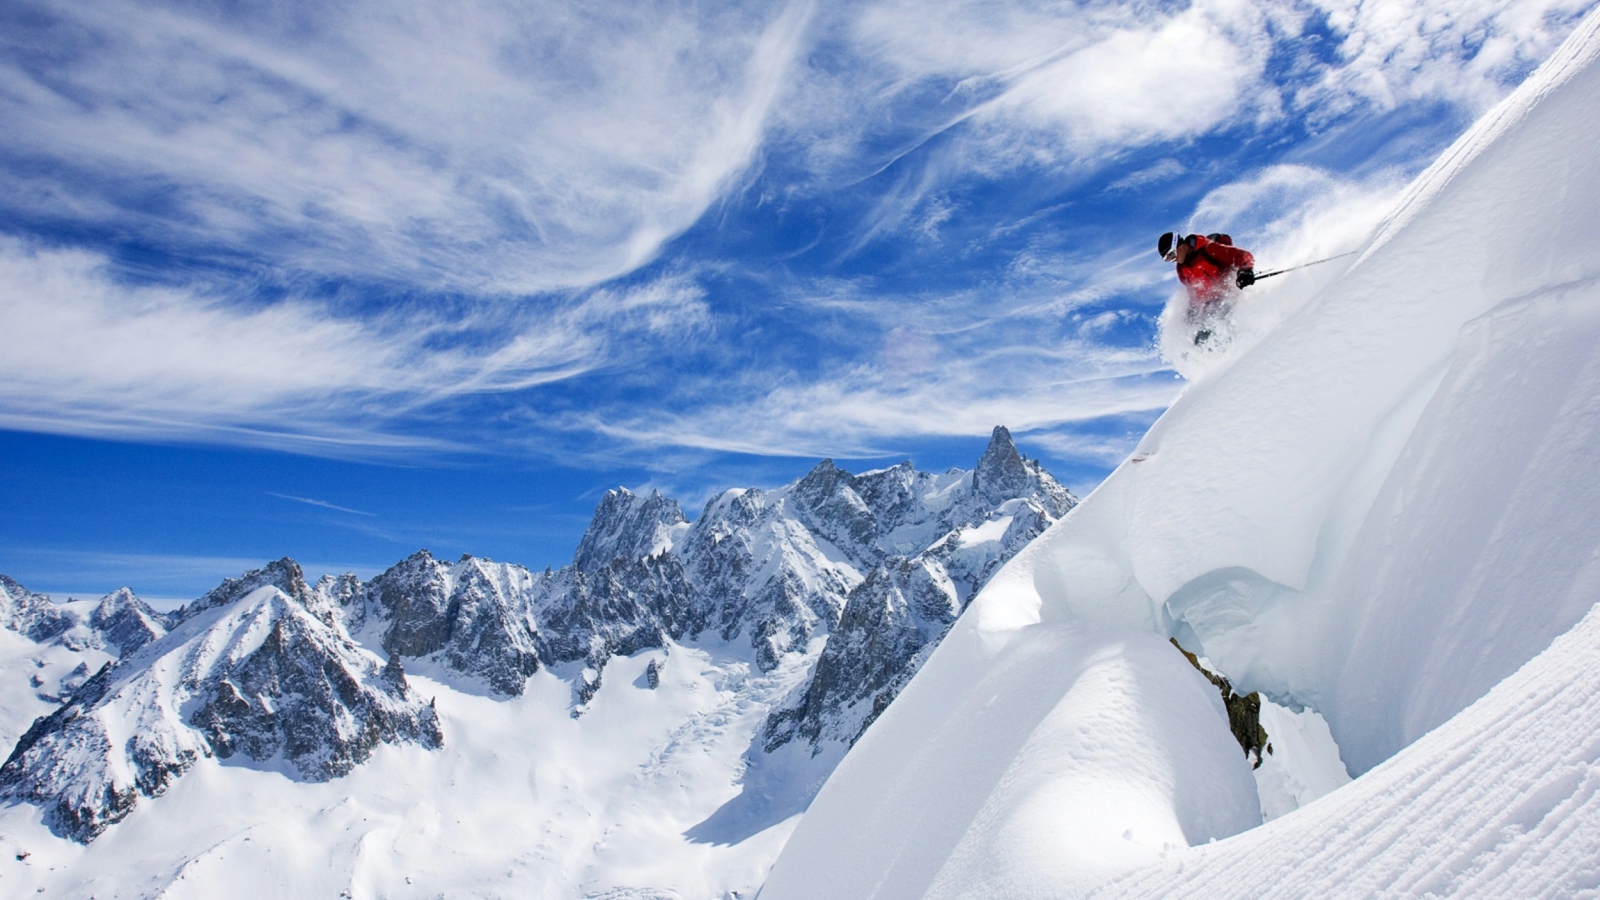 Skiing In France wallpaper 1600x900